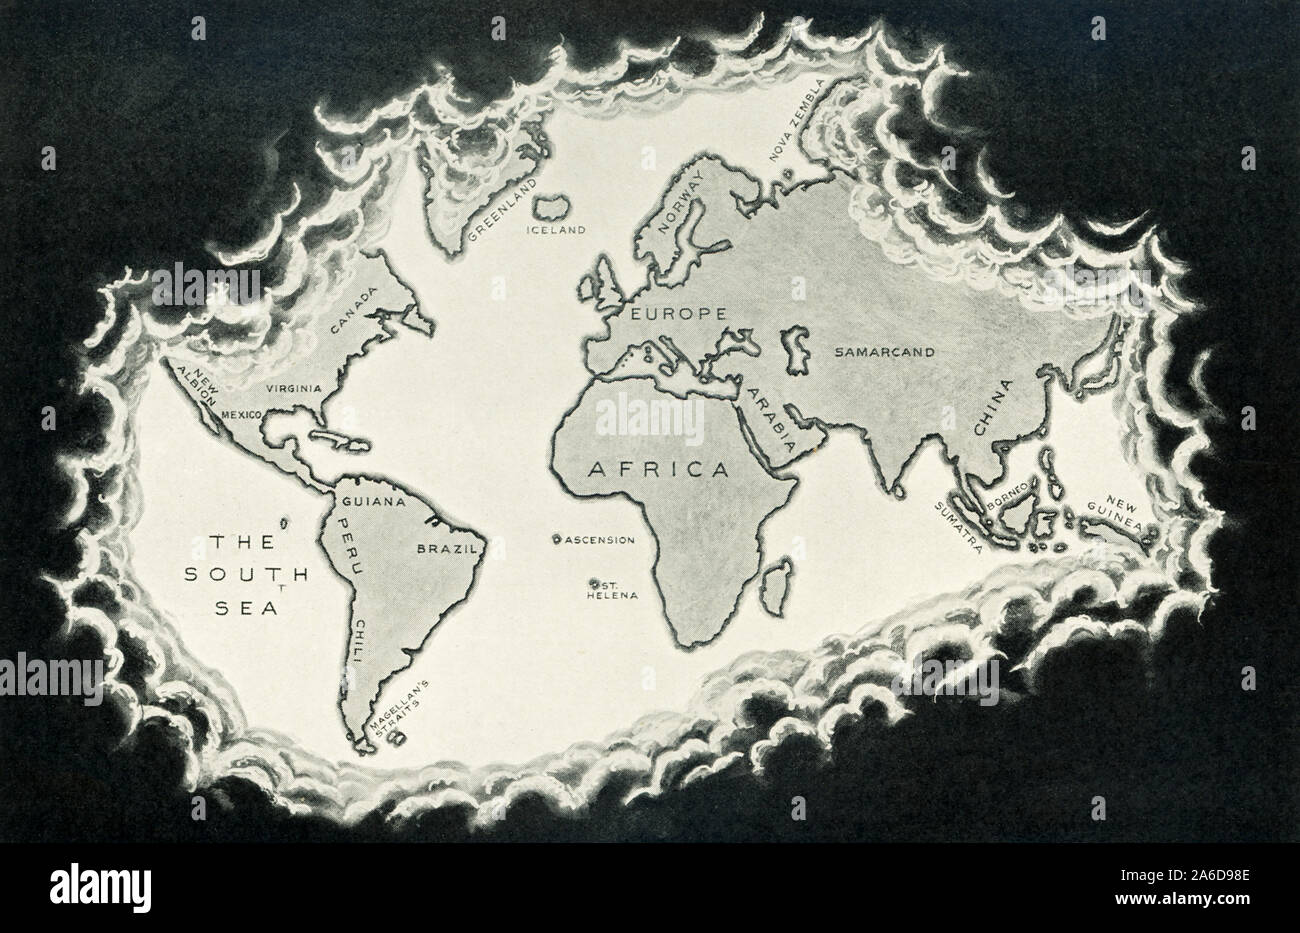 This illustration dates to 1912 and is part of a series of maps titled: “The Unrolling of the Clouds.” It is the fifth in the series. It shows the world as known after the circumnavigation by Sir Francis Drake in the years 1577-1580. The First Englishman to Sail Round the World. Drake carried out the second circumnavigation of the world in a single expedition, from 1577 to 1580, and was the first to complete the voyage as captain while leading the expedition throughout the entire circumnavigation. Stock Photo